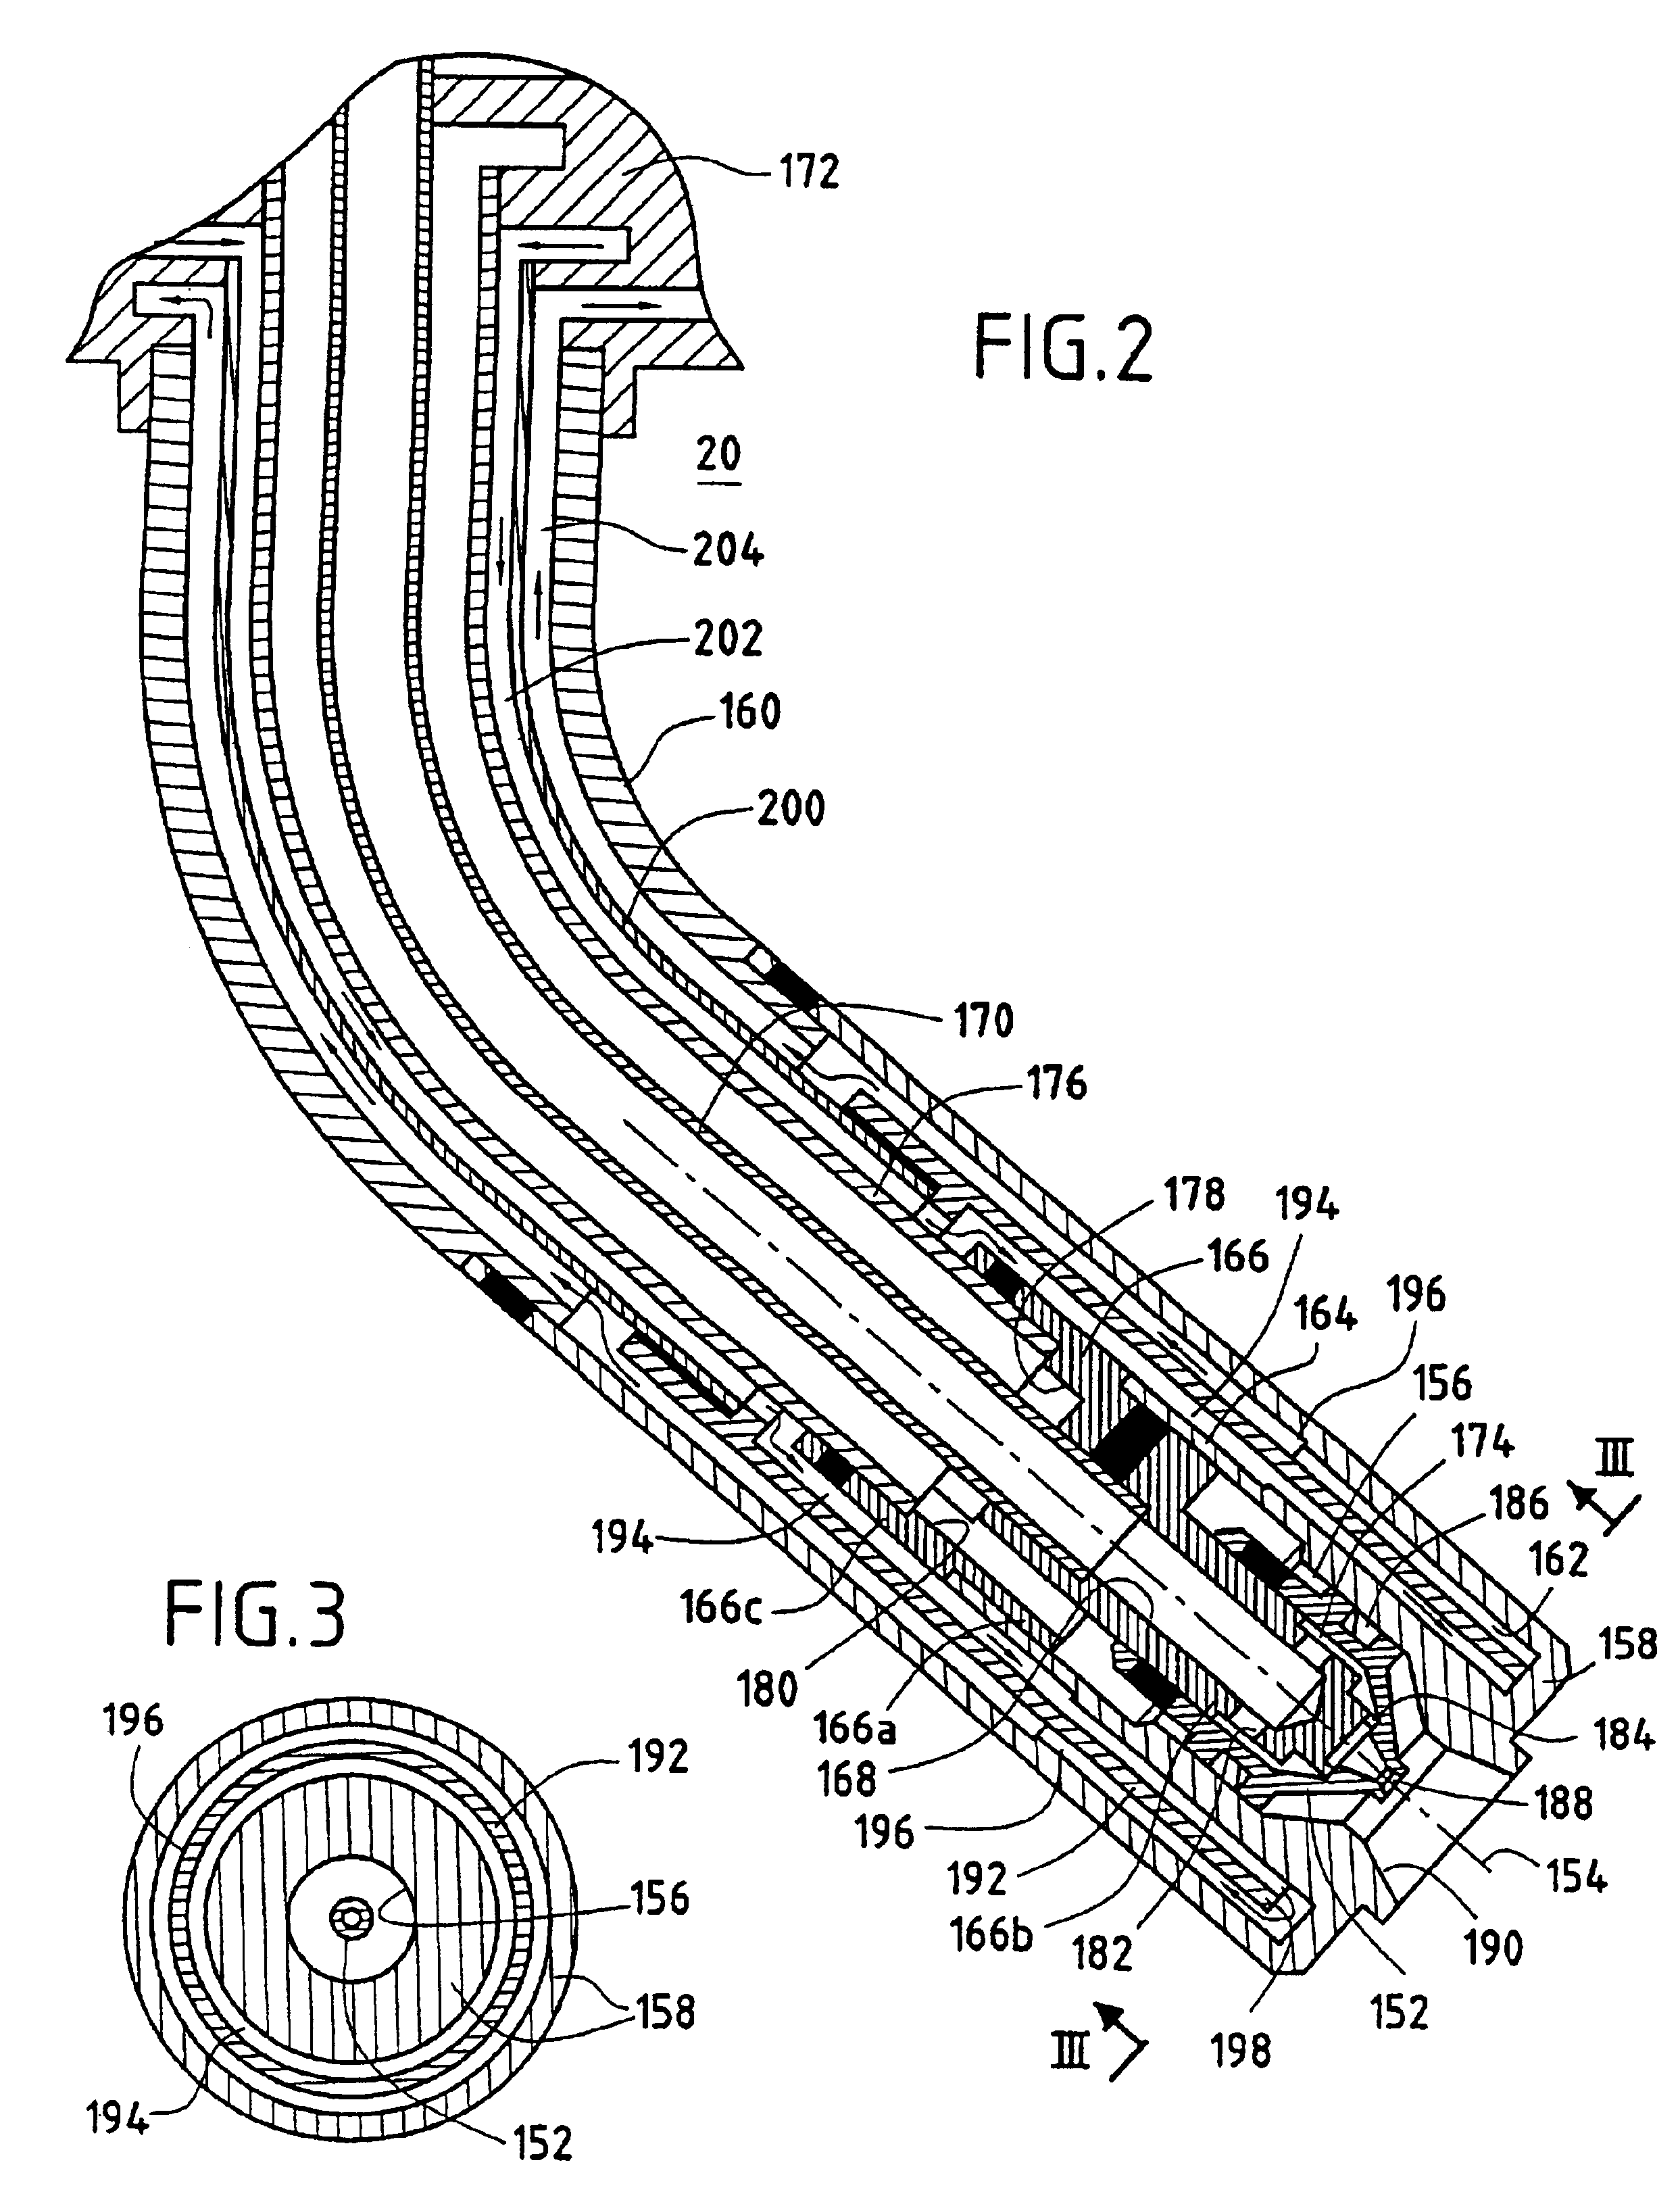 Full cooling of main injectors in a two-headed combustion chamber